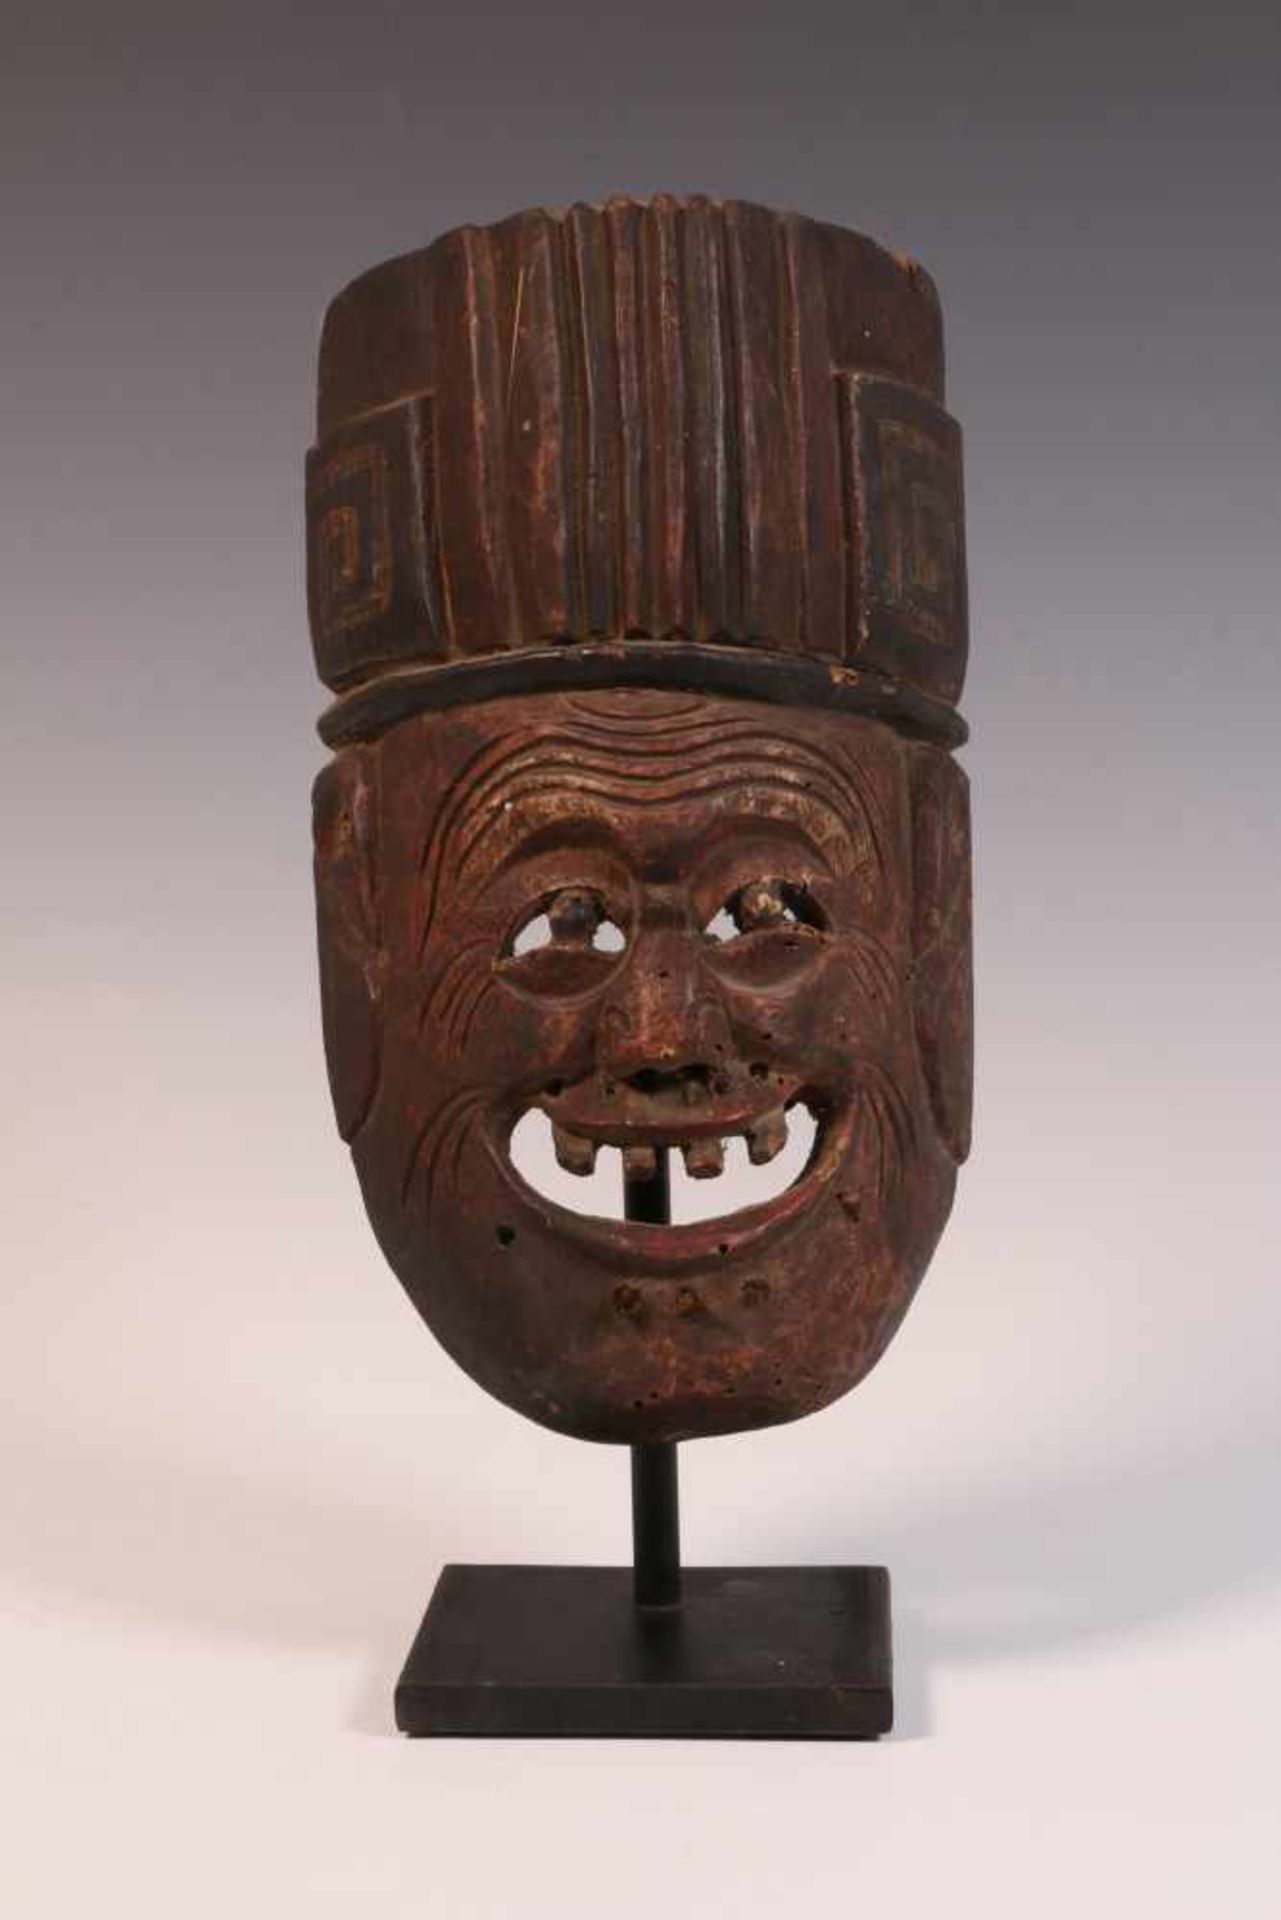 China, Yao, Guizho, Khali, carved wooden face mask,depicting a Priest. With expressive face and